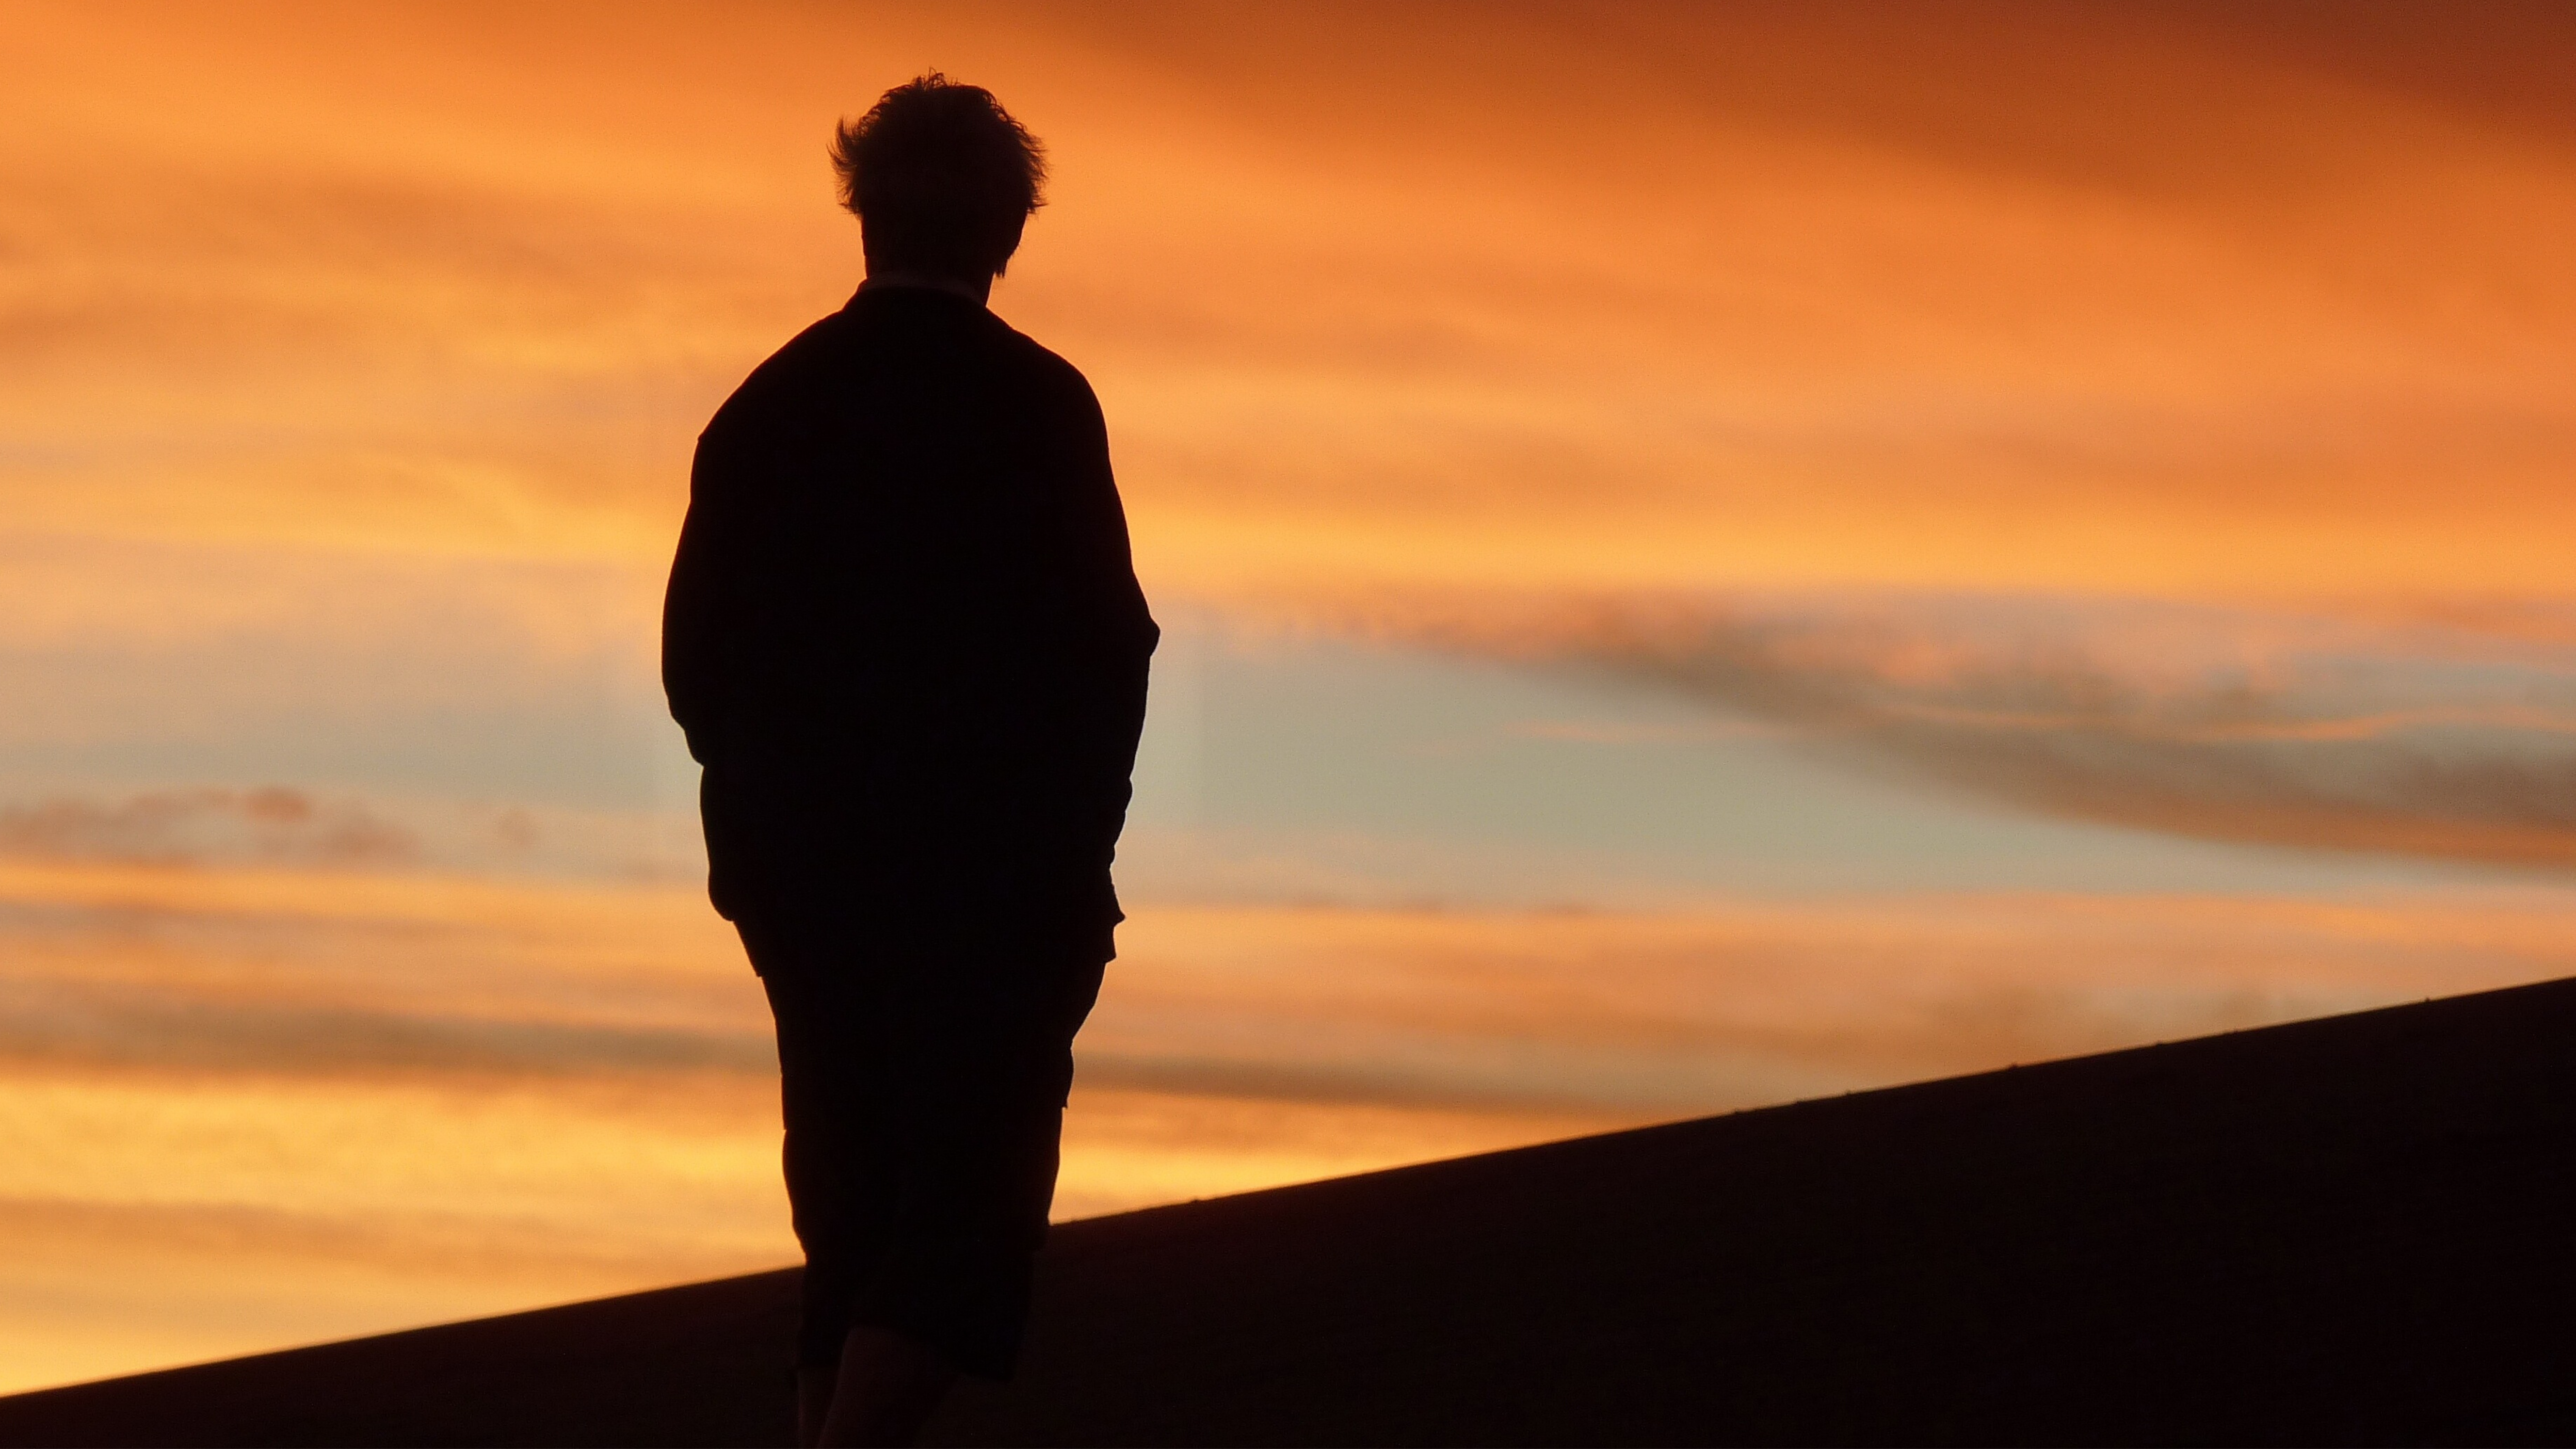 man with dementia silhouette of him standing on a hill as the sun goes down